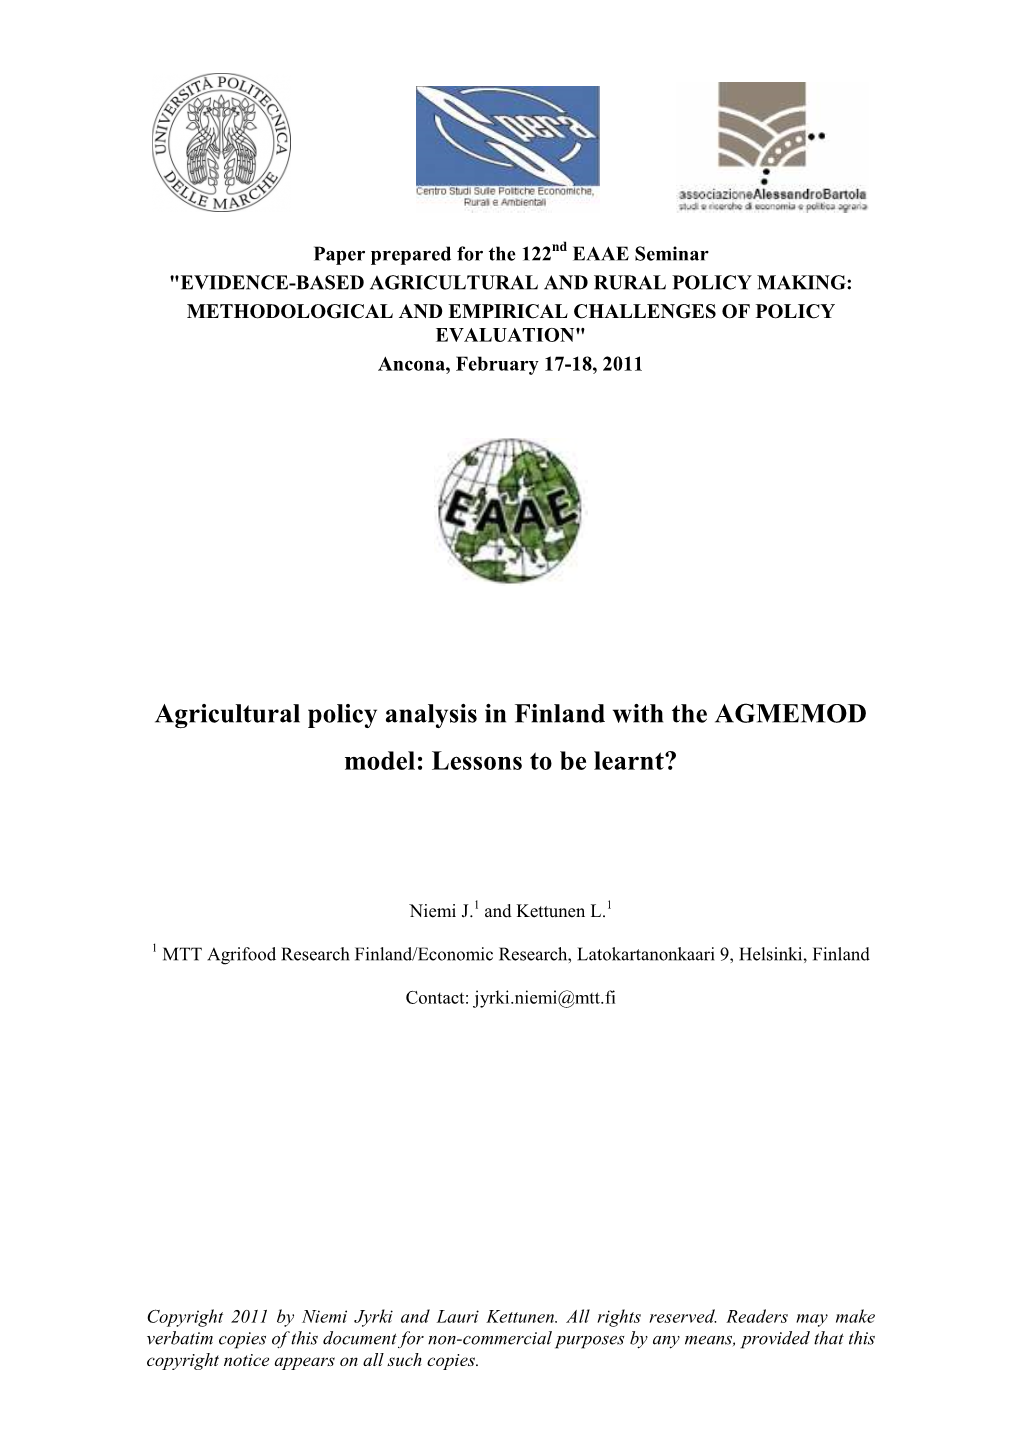 Agricultural Policy Analysis in Finland with the AGMEMOD Model: Lessons to Be Learnt?